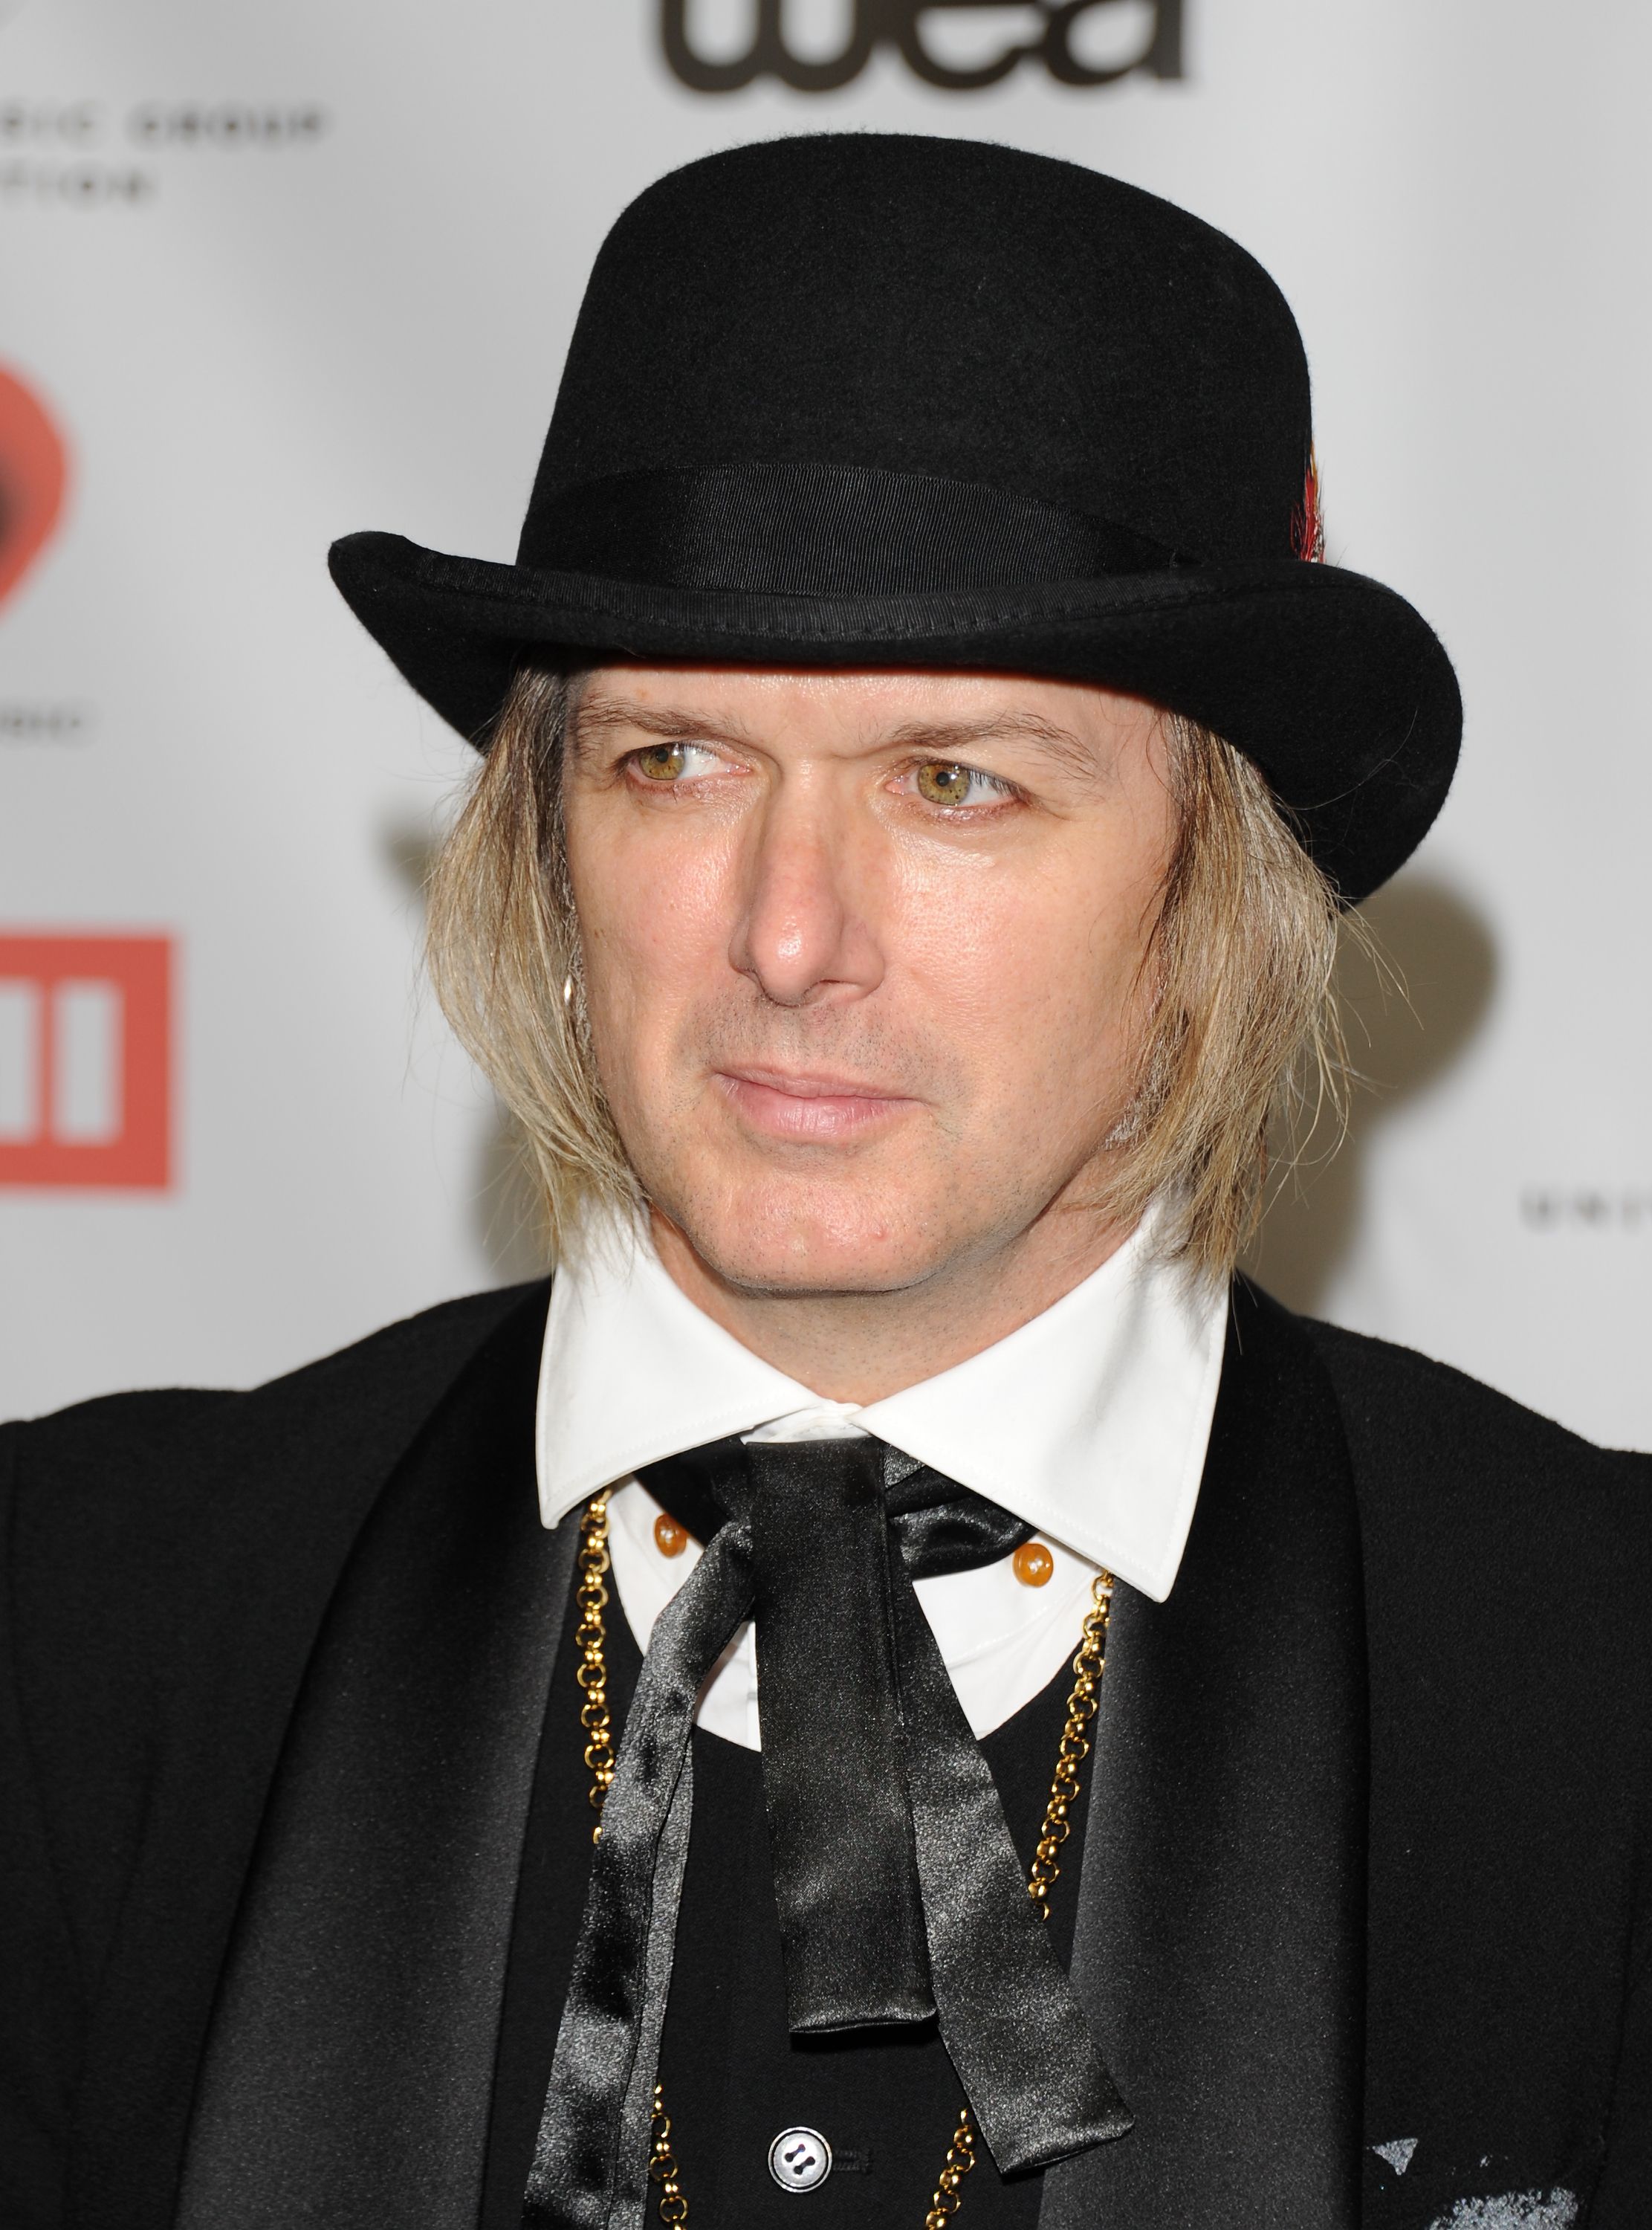 Michael Lockwood at the NARM Music Biz Awards Dinner Party on May 10, 2012 in Century City, California | Photo: JB Lacroix/WireImage/Getty Images